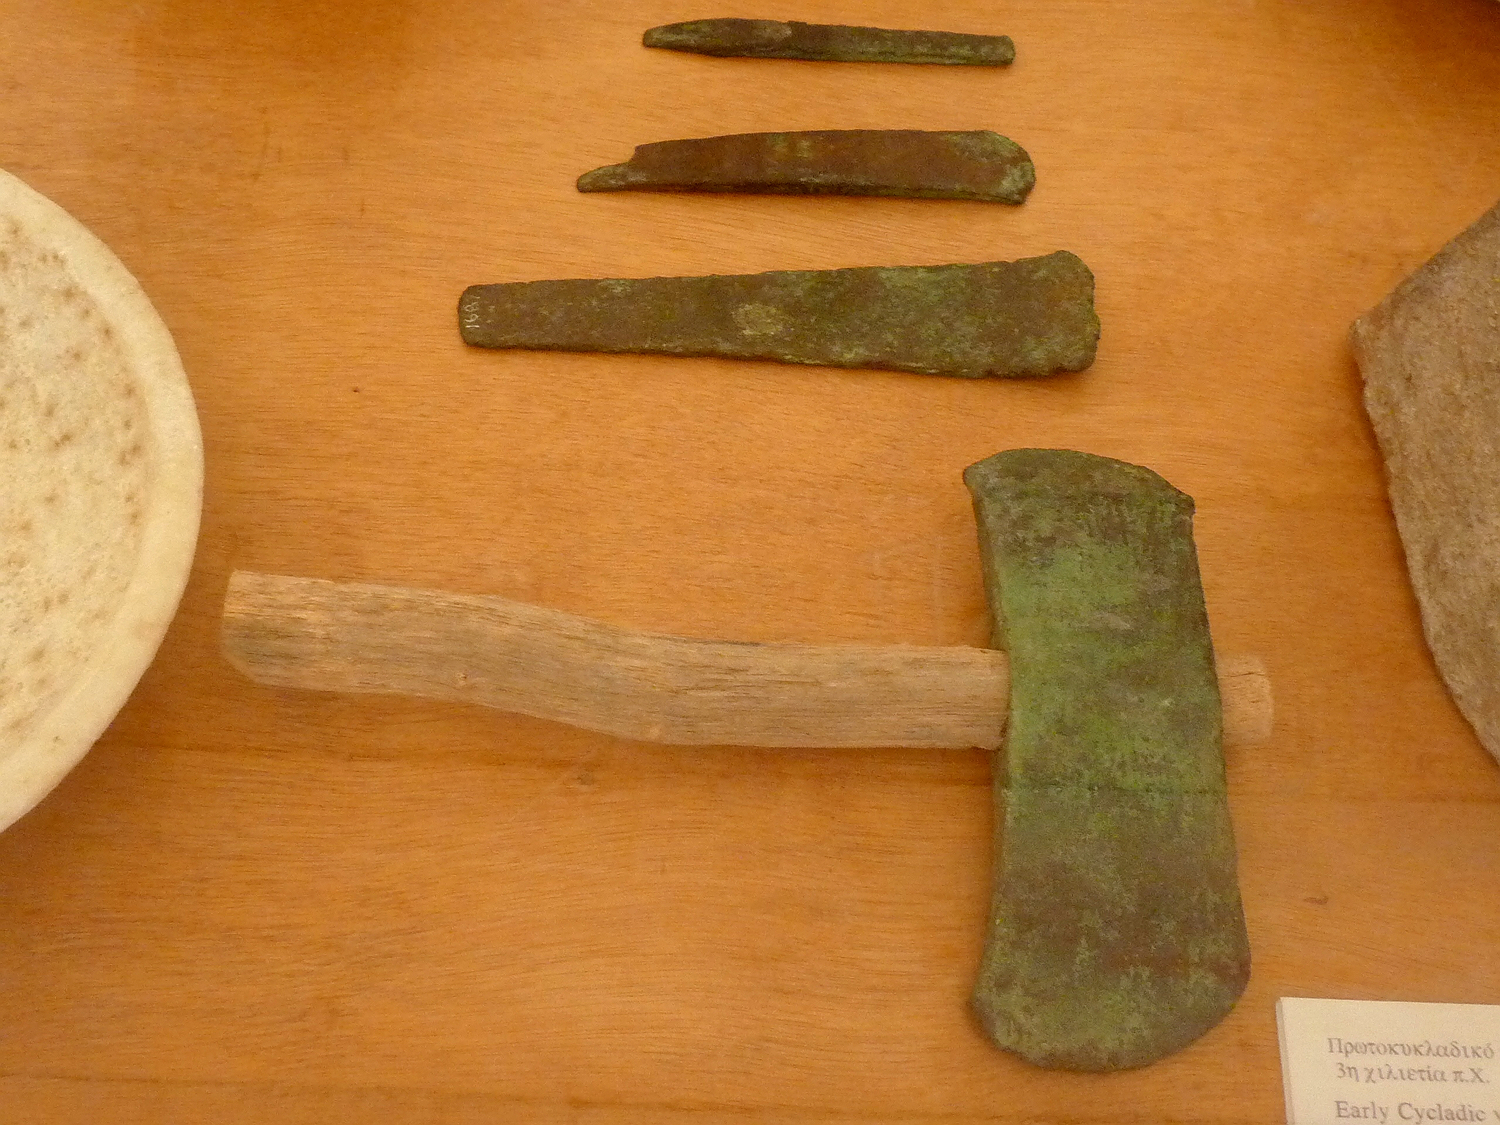 cycladic carpentry tools: hatchet and chisels